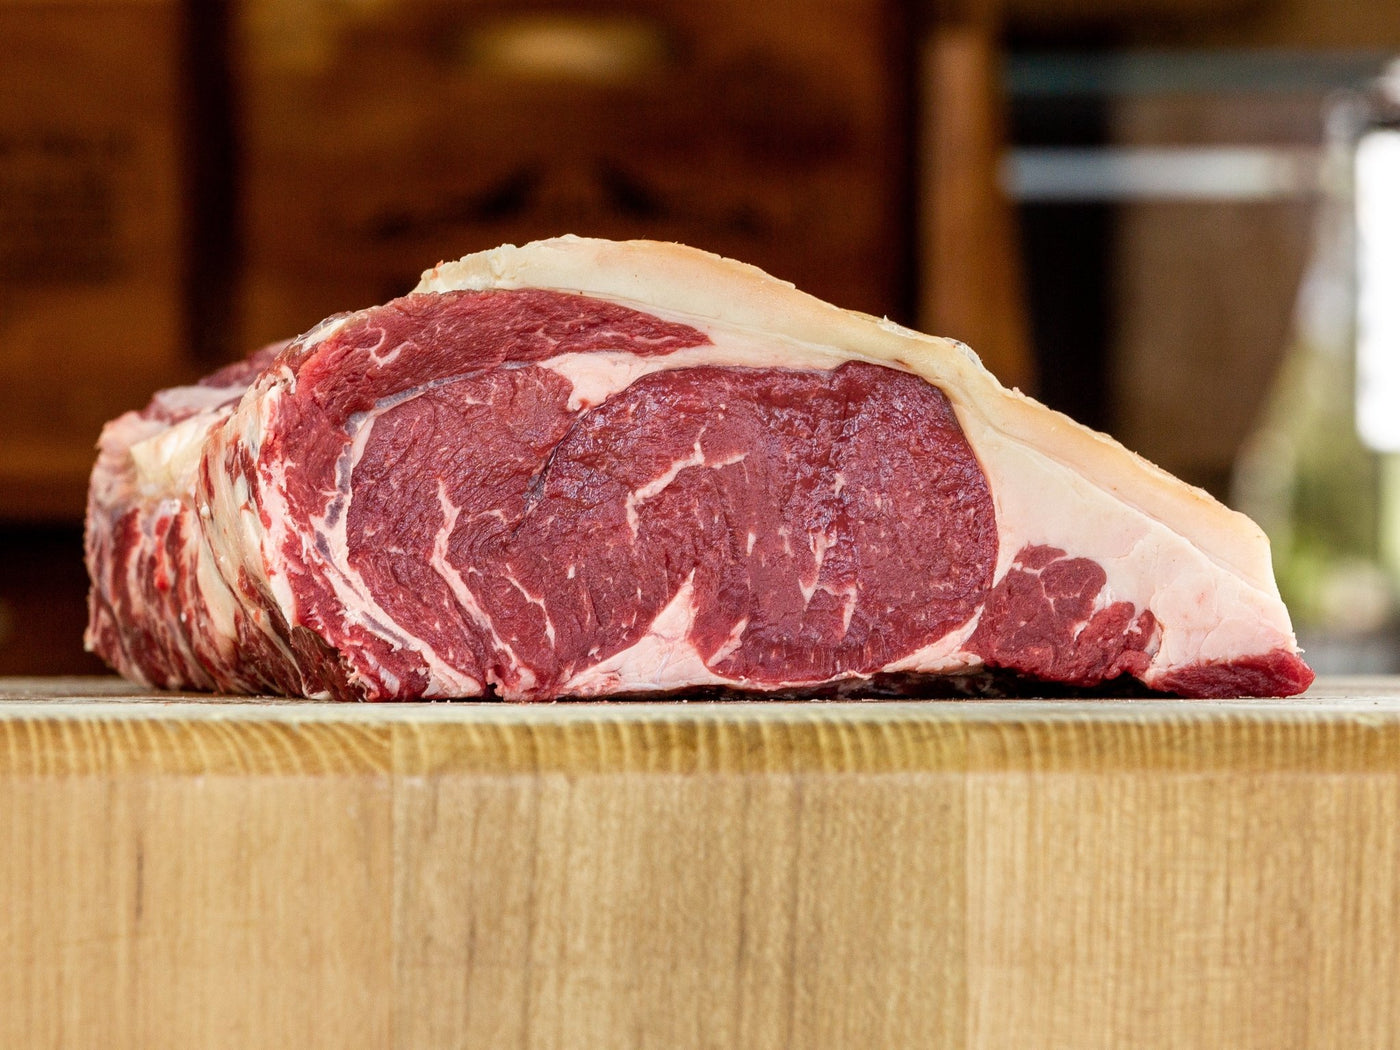 Grass Fed, Dry-Aged Sirloin Steak - Beef - Thomas Joseph Butchery - Ethical Dry-Aged Meat The Best Steak UK Thomas Joseph Butchery